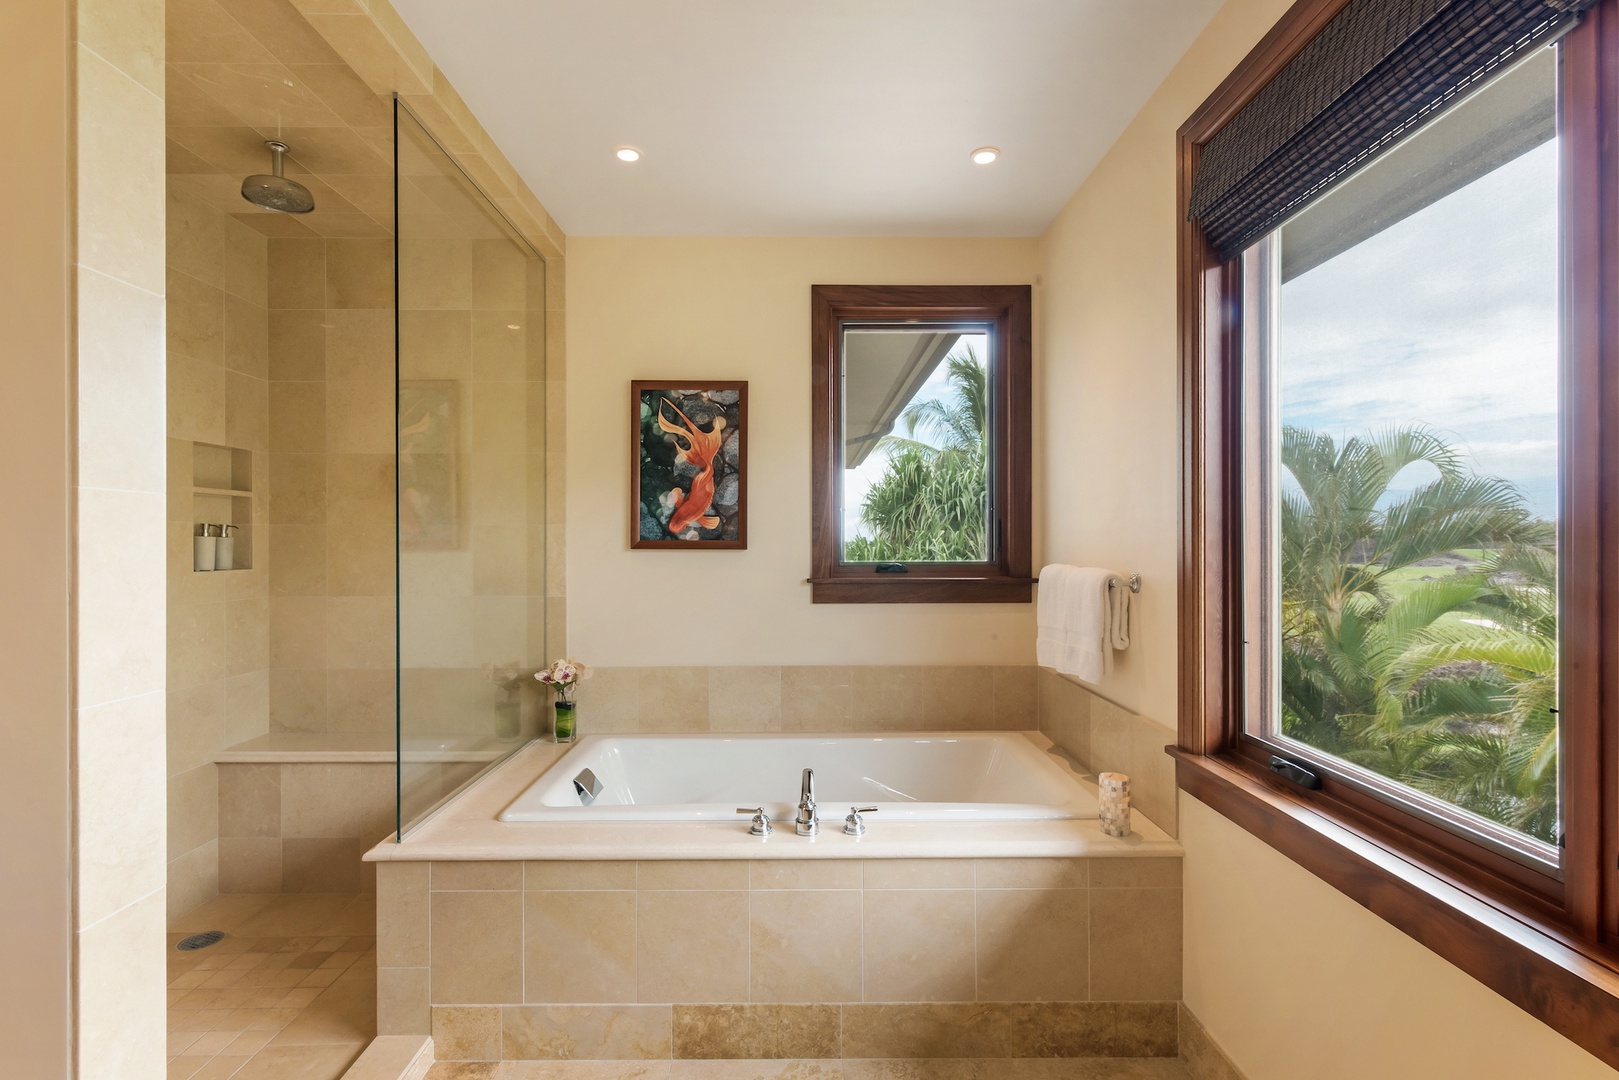 Kamuela Vacation Rentals, 3BD OneOcean (1C) at Mauna Lani Resort - Upstairs Primary Ensuite Bath w/ Glass Shower, Luxurious Soaking Tub & Picture Window.